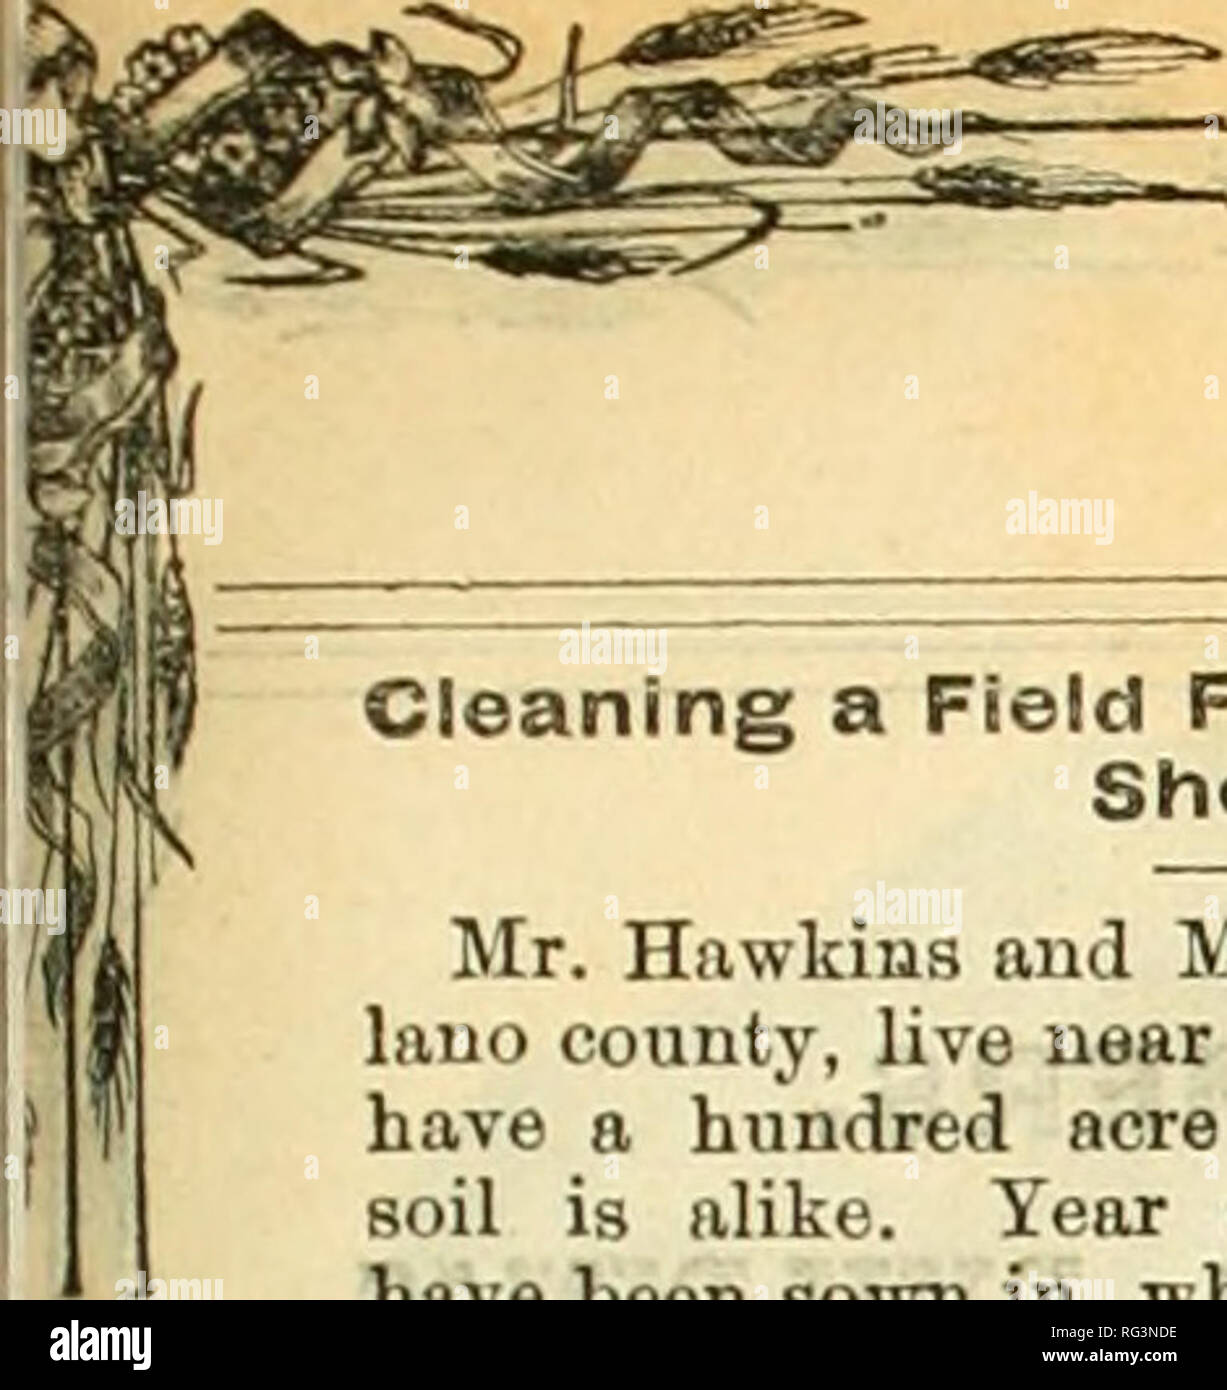 . California agriculturist and live stock journal. Agriculture -- California; Livestock -- California; Animal industry -- California. California Agriculturist and Live Stock Journal. Cleaning a Field From Thistles With Sheep. Mr. Hawkins aud Mr. Broughton, of So- lano county, live near together. They each have a hundred acre field adjoining. The soil is alike. Year after year these fields have been sown in wheat until the average croi&gt; was not more than fifteen or twenty bushels to the acre; beside this the little thistle, or nettle as some caU it, had almost taken possession of them. Durin Stock Photo